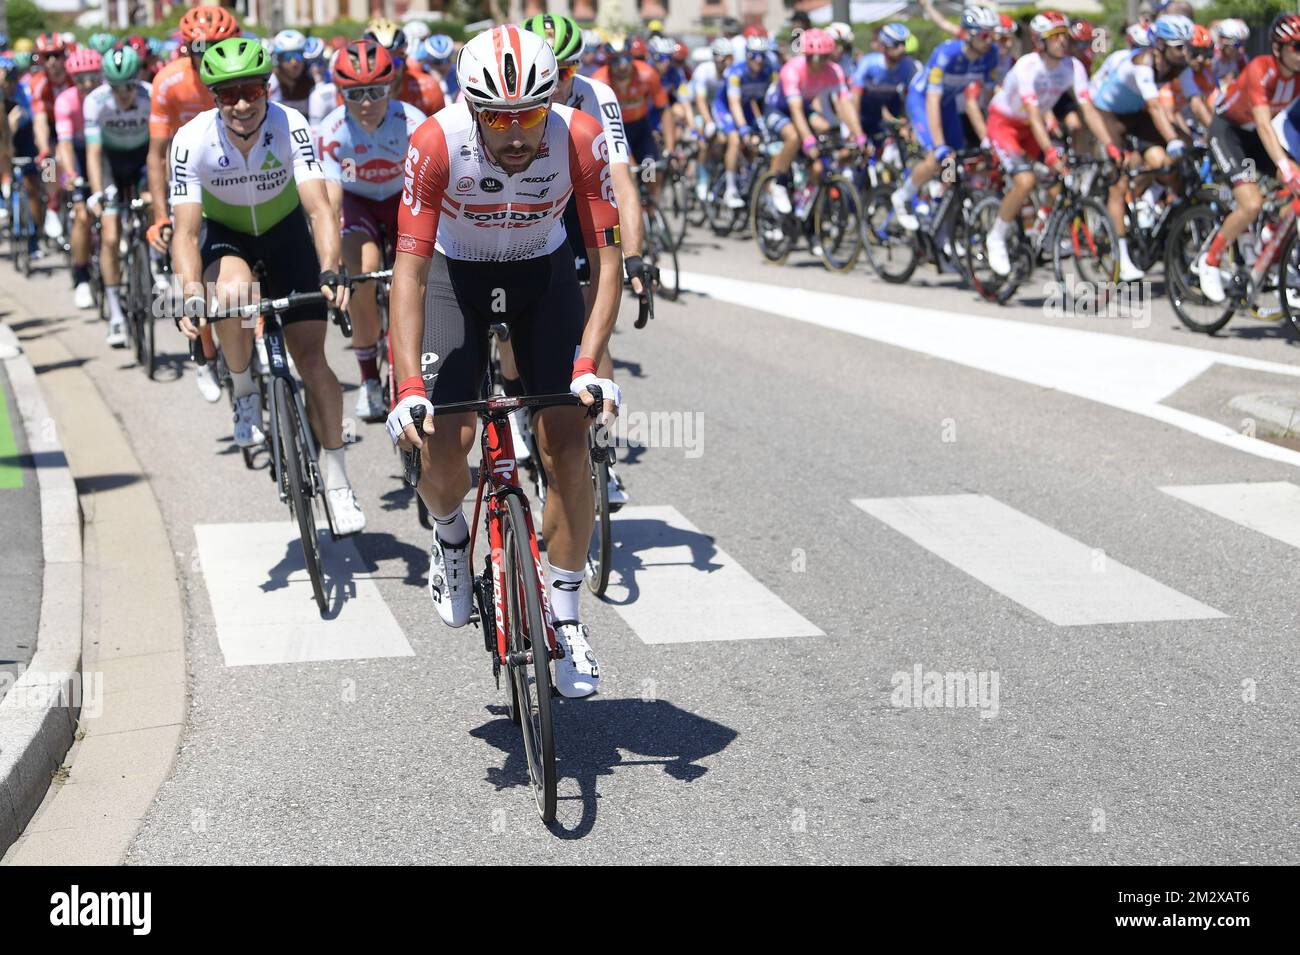 Belgian Thomas De Gendt of Lotto Soudal rides during the fifth stage of the 106th edition of the Tour de France cycling race, 175,5 km from Saint-Die-des-Vosges to Colmar, Wednesday 10 July 2019. This year's Tour de France starts in Brussels and takes place from July 6th to July 28th. BELGA PHOTO YORICK JANSENS  Stock Photo